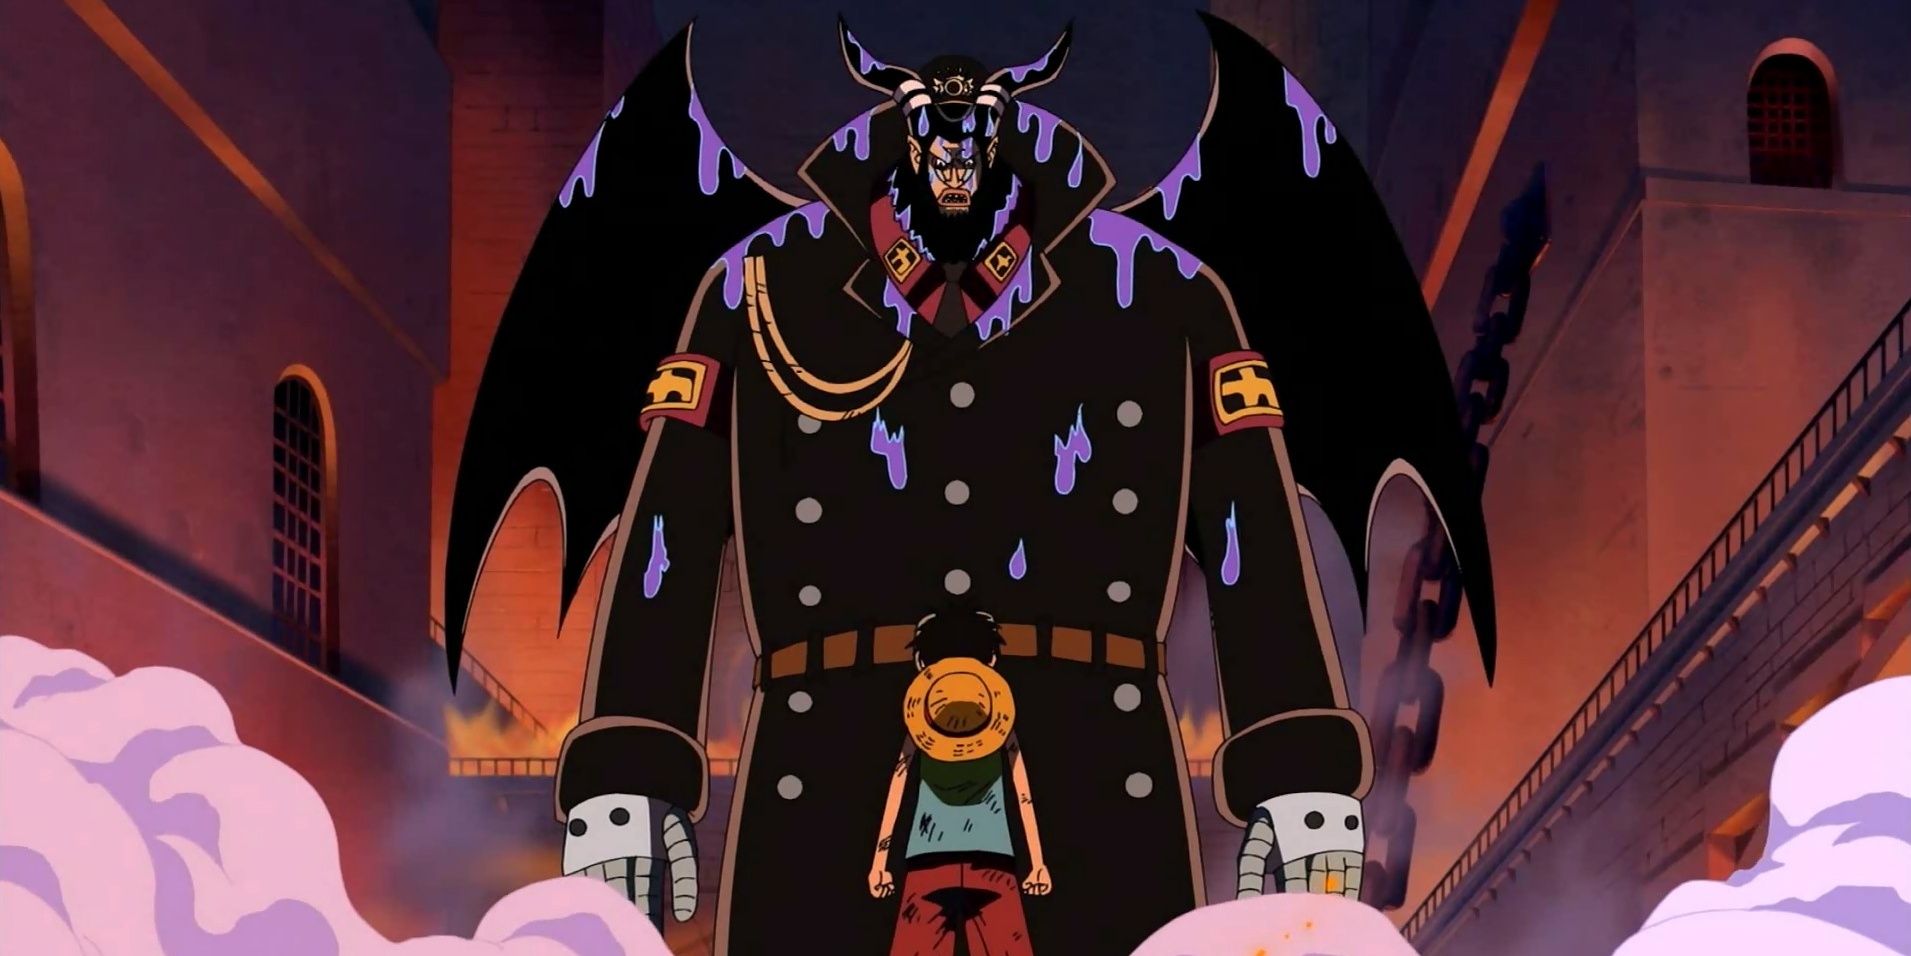 Magellan towers over Luffy in Impel Down in One Piece